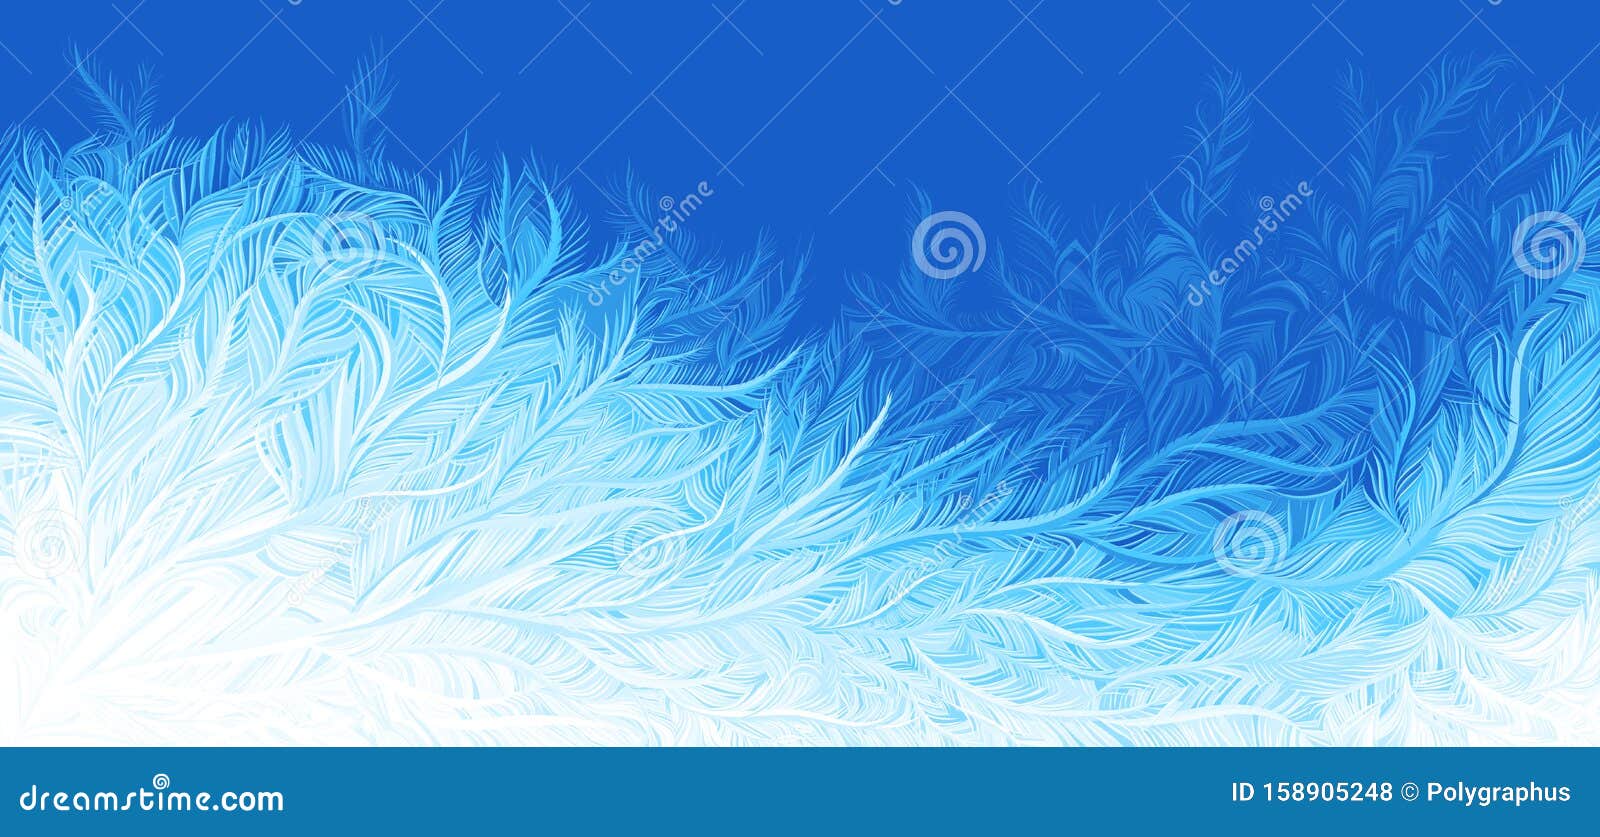 winter blue curly ice frost christmas background.  